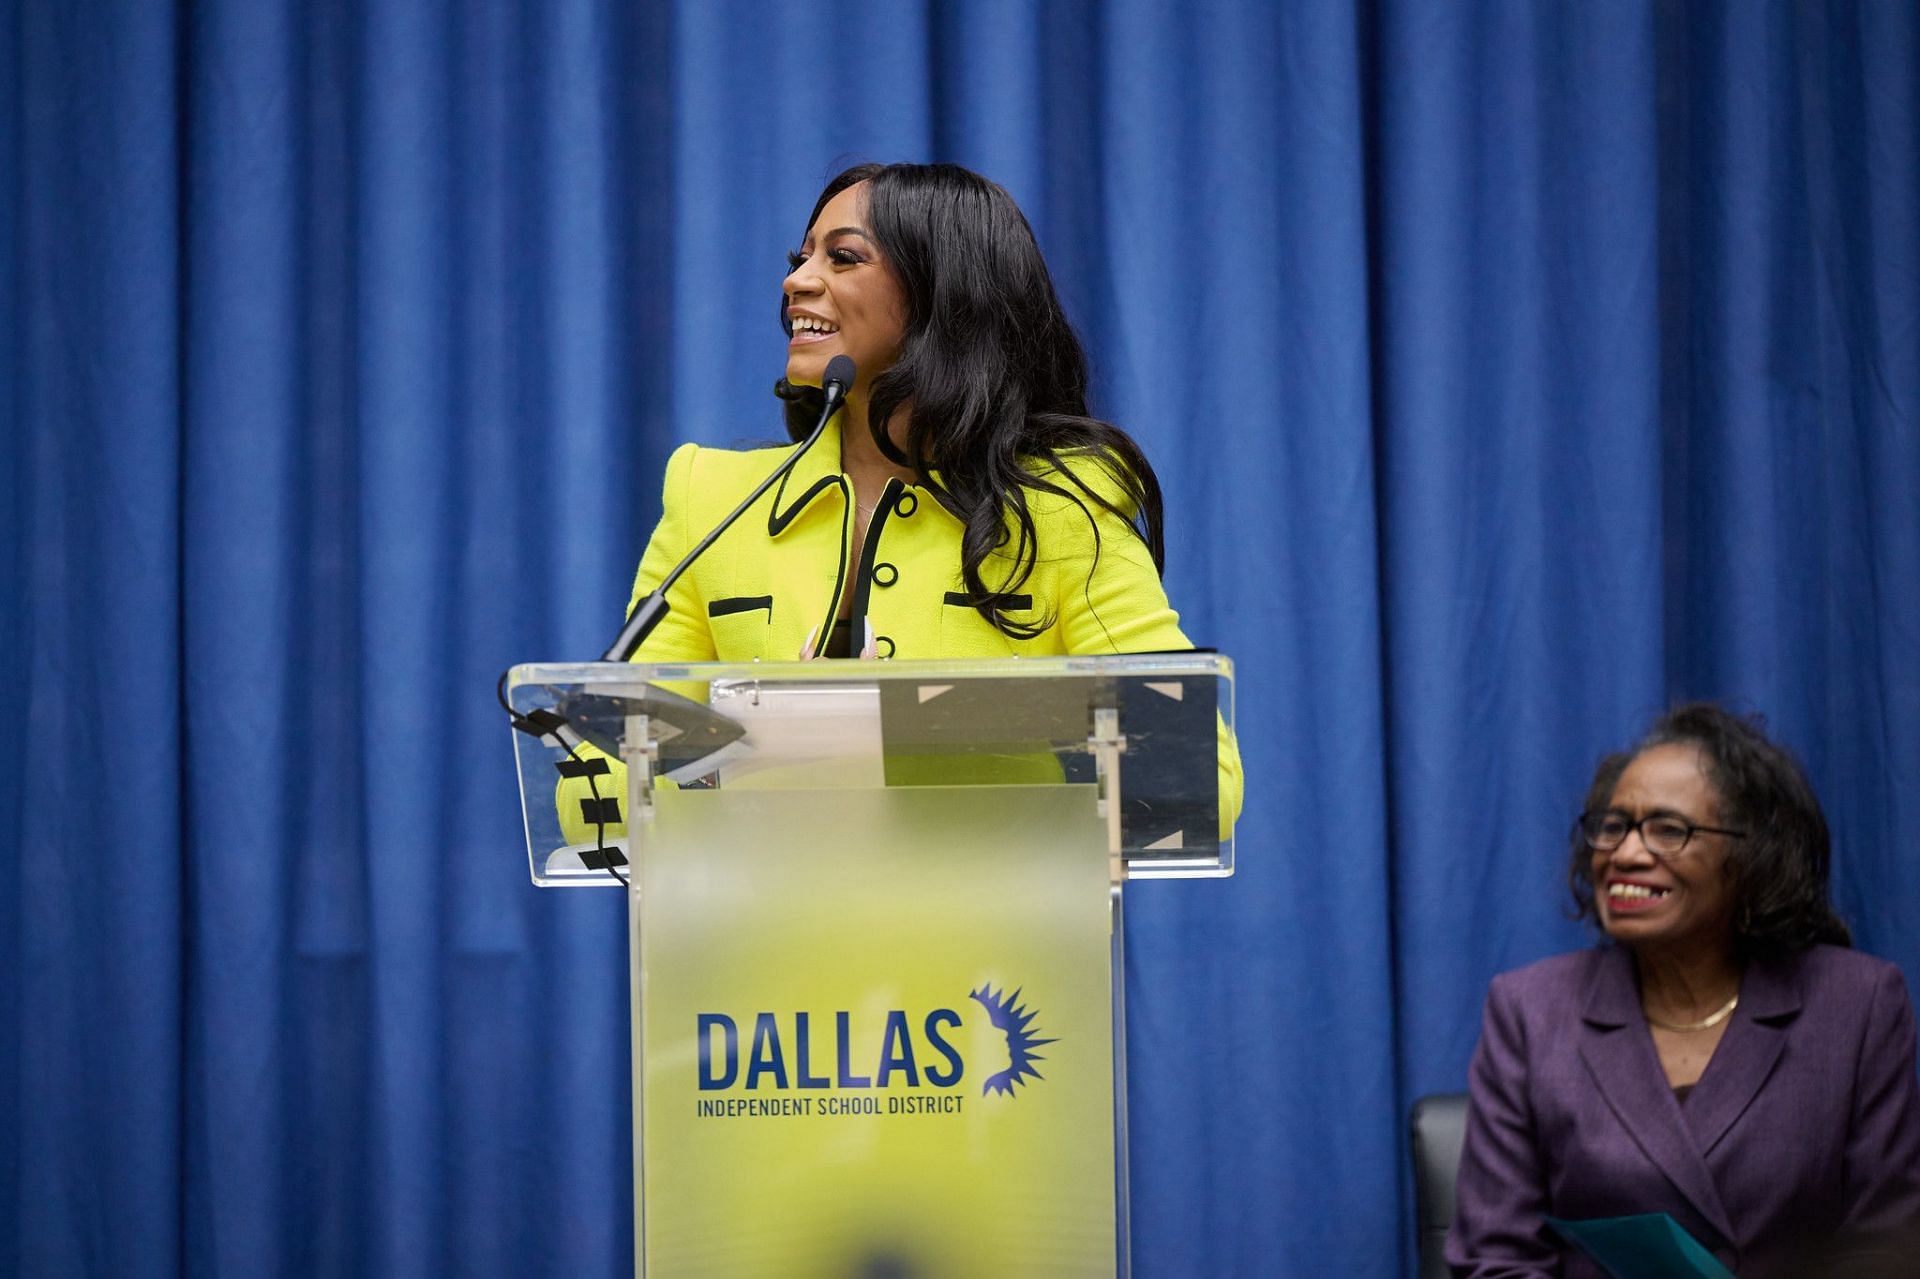 Richardson addressing the audience (Images by @dallasschools)